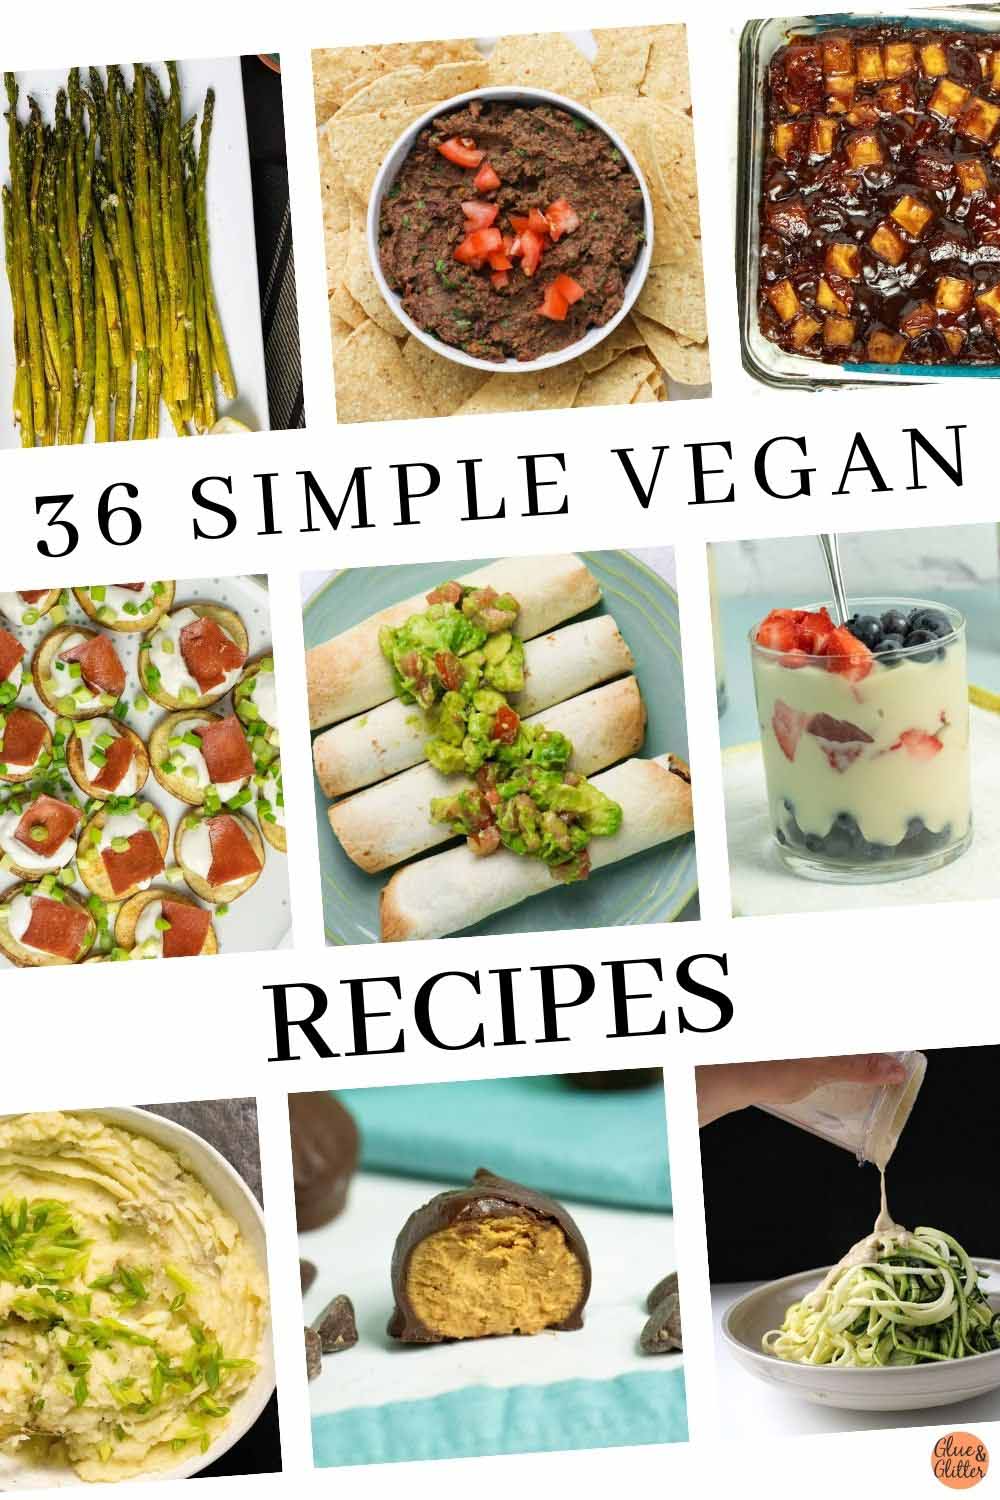 image collage of appetizers, dips, entrees, and desserts with text that reads: 36 simple vegan recipes